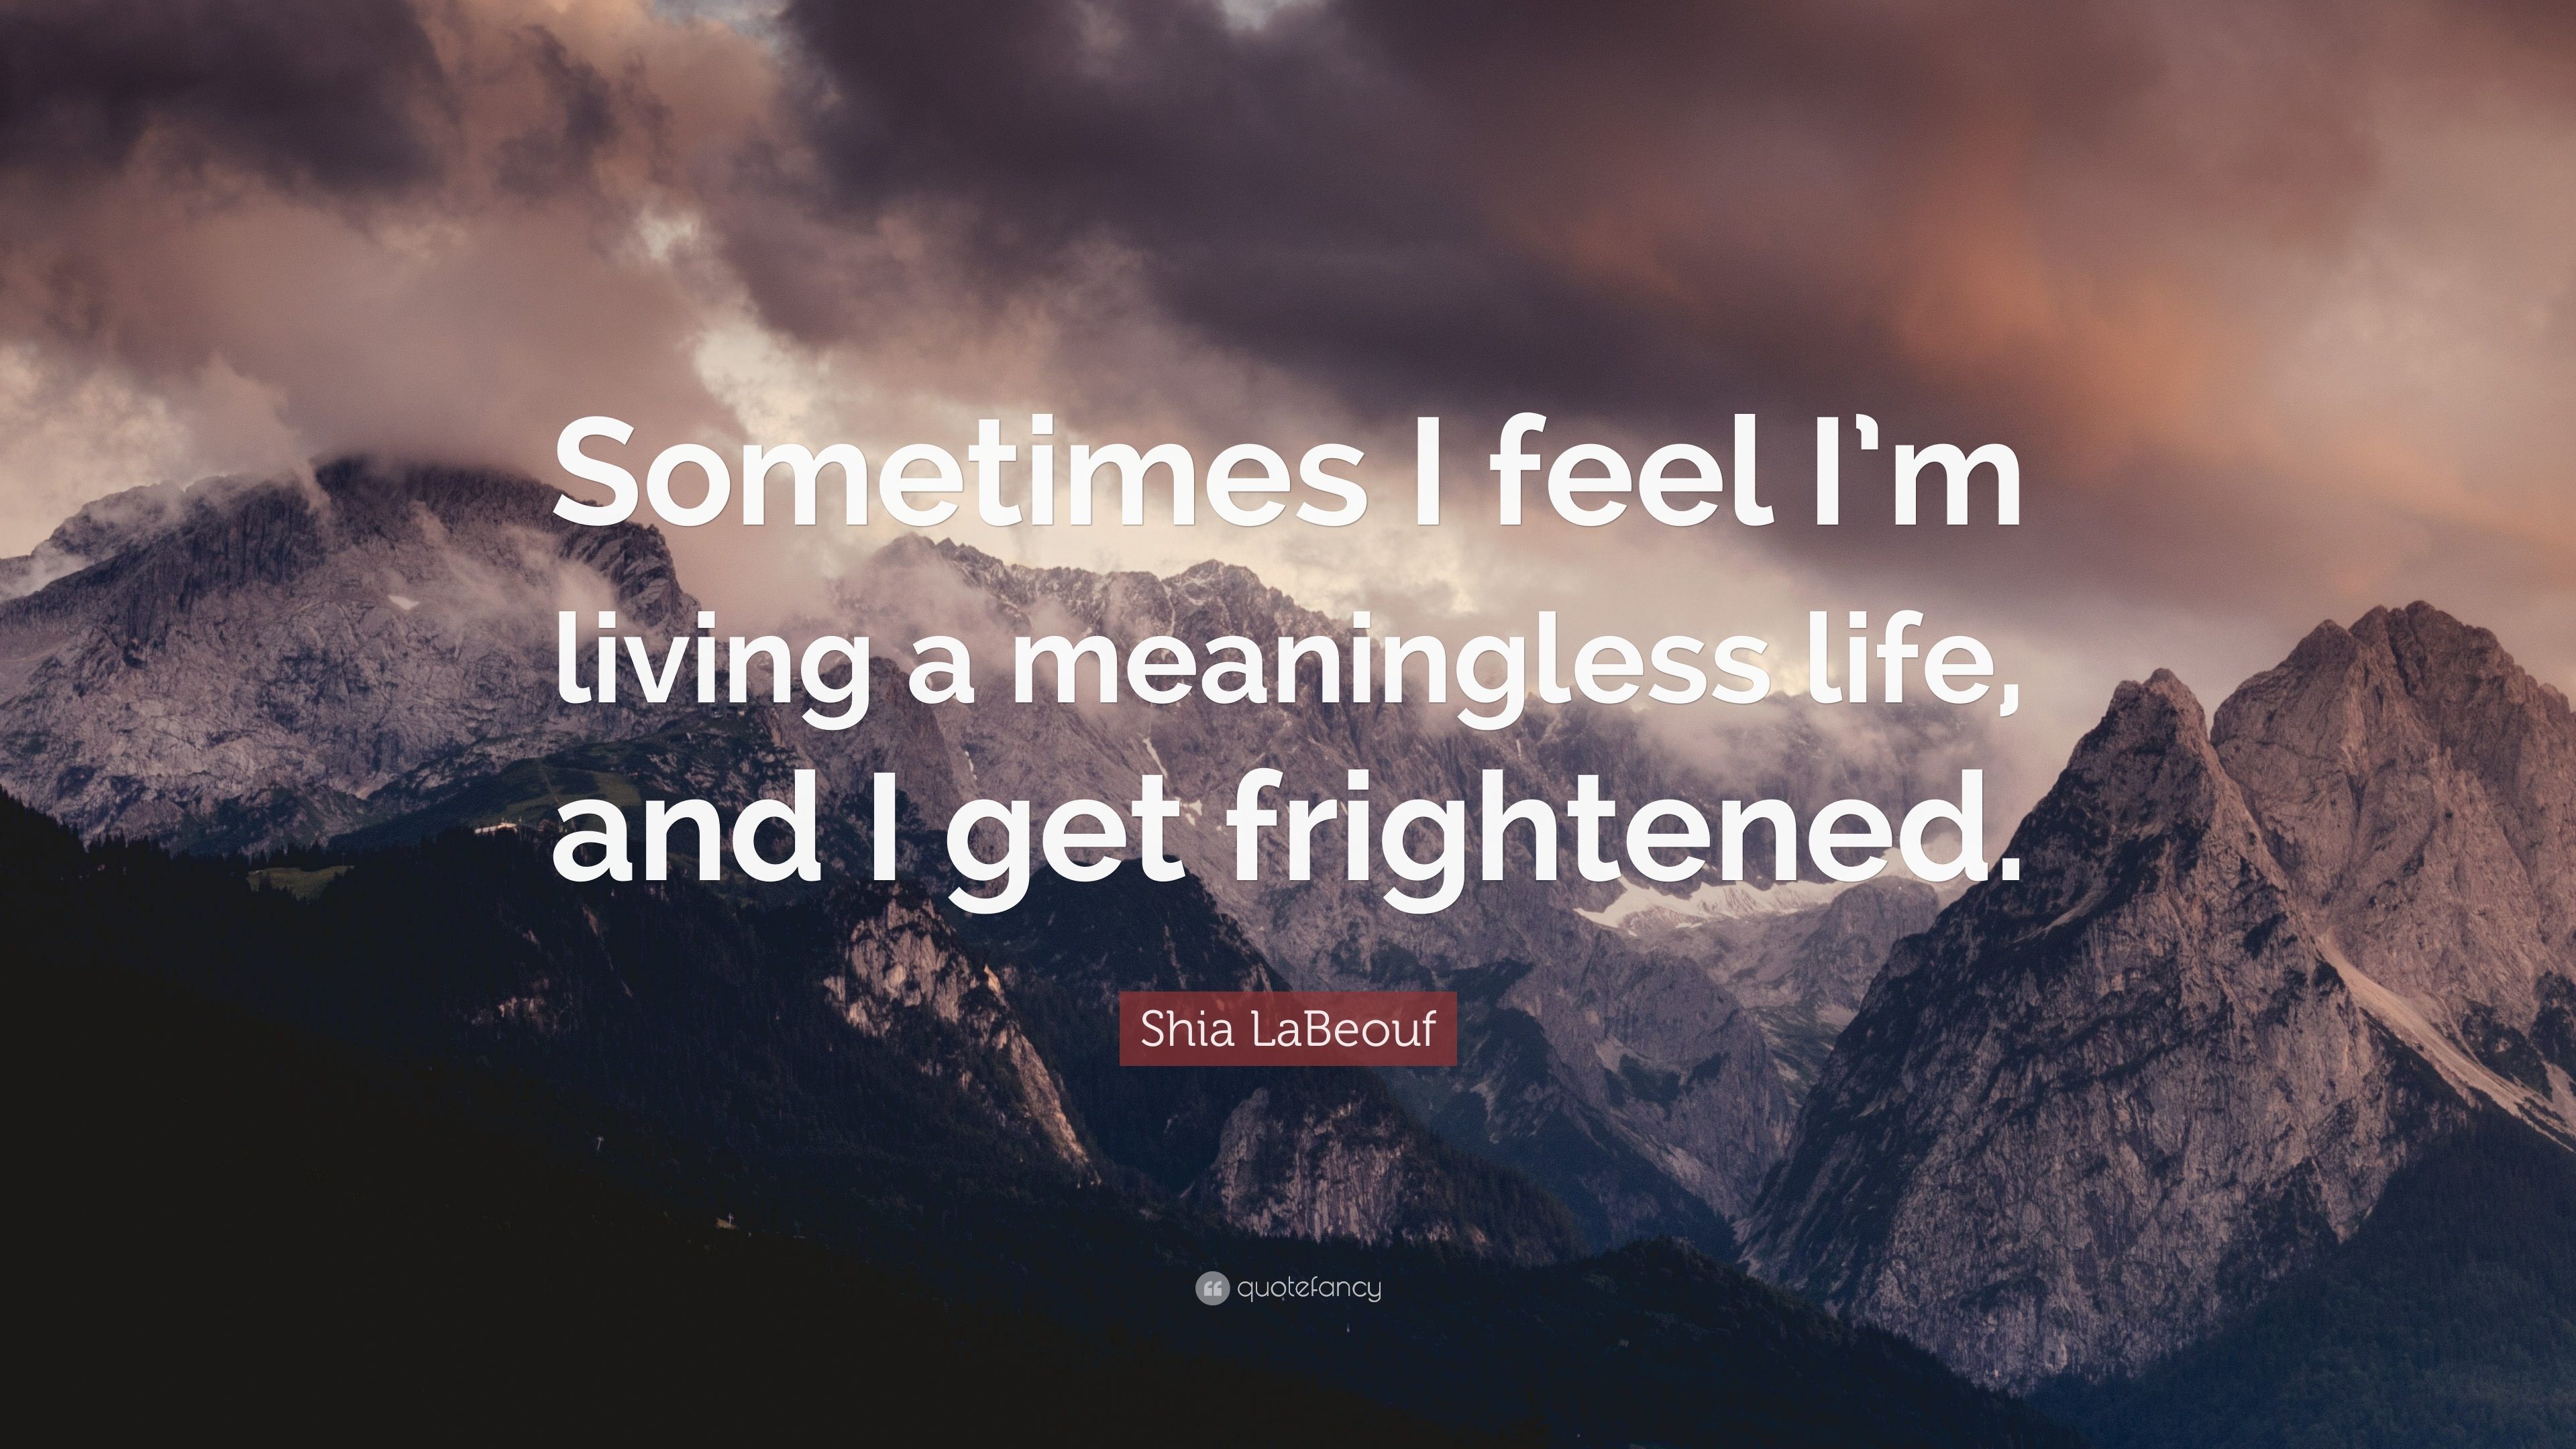 3840x2160 Shia LaBeouf Quote: “Sometimes I feel I'm living a meaningless life,